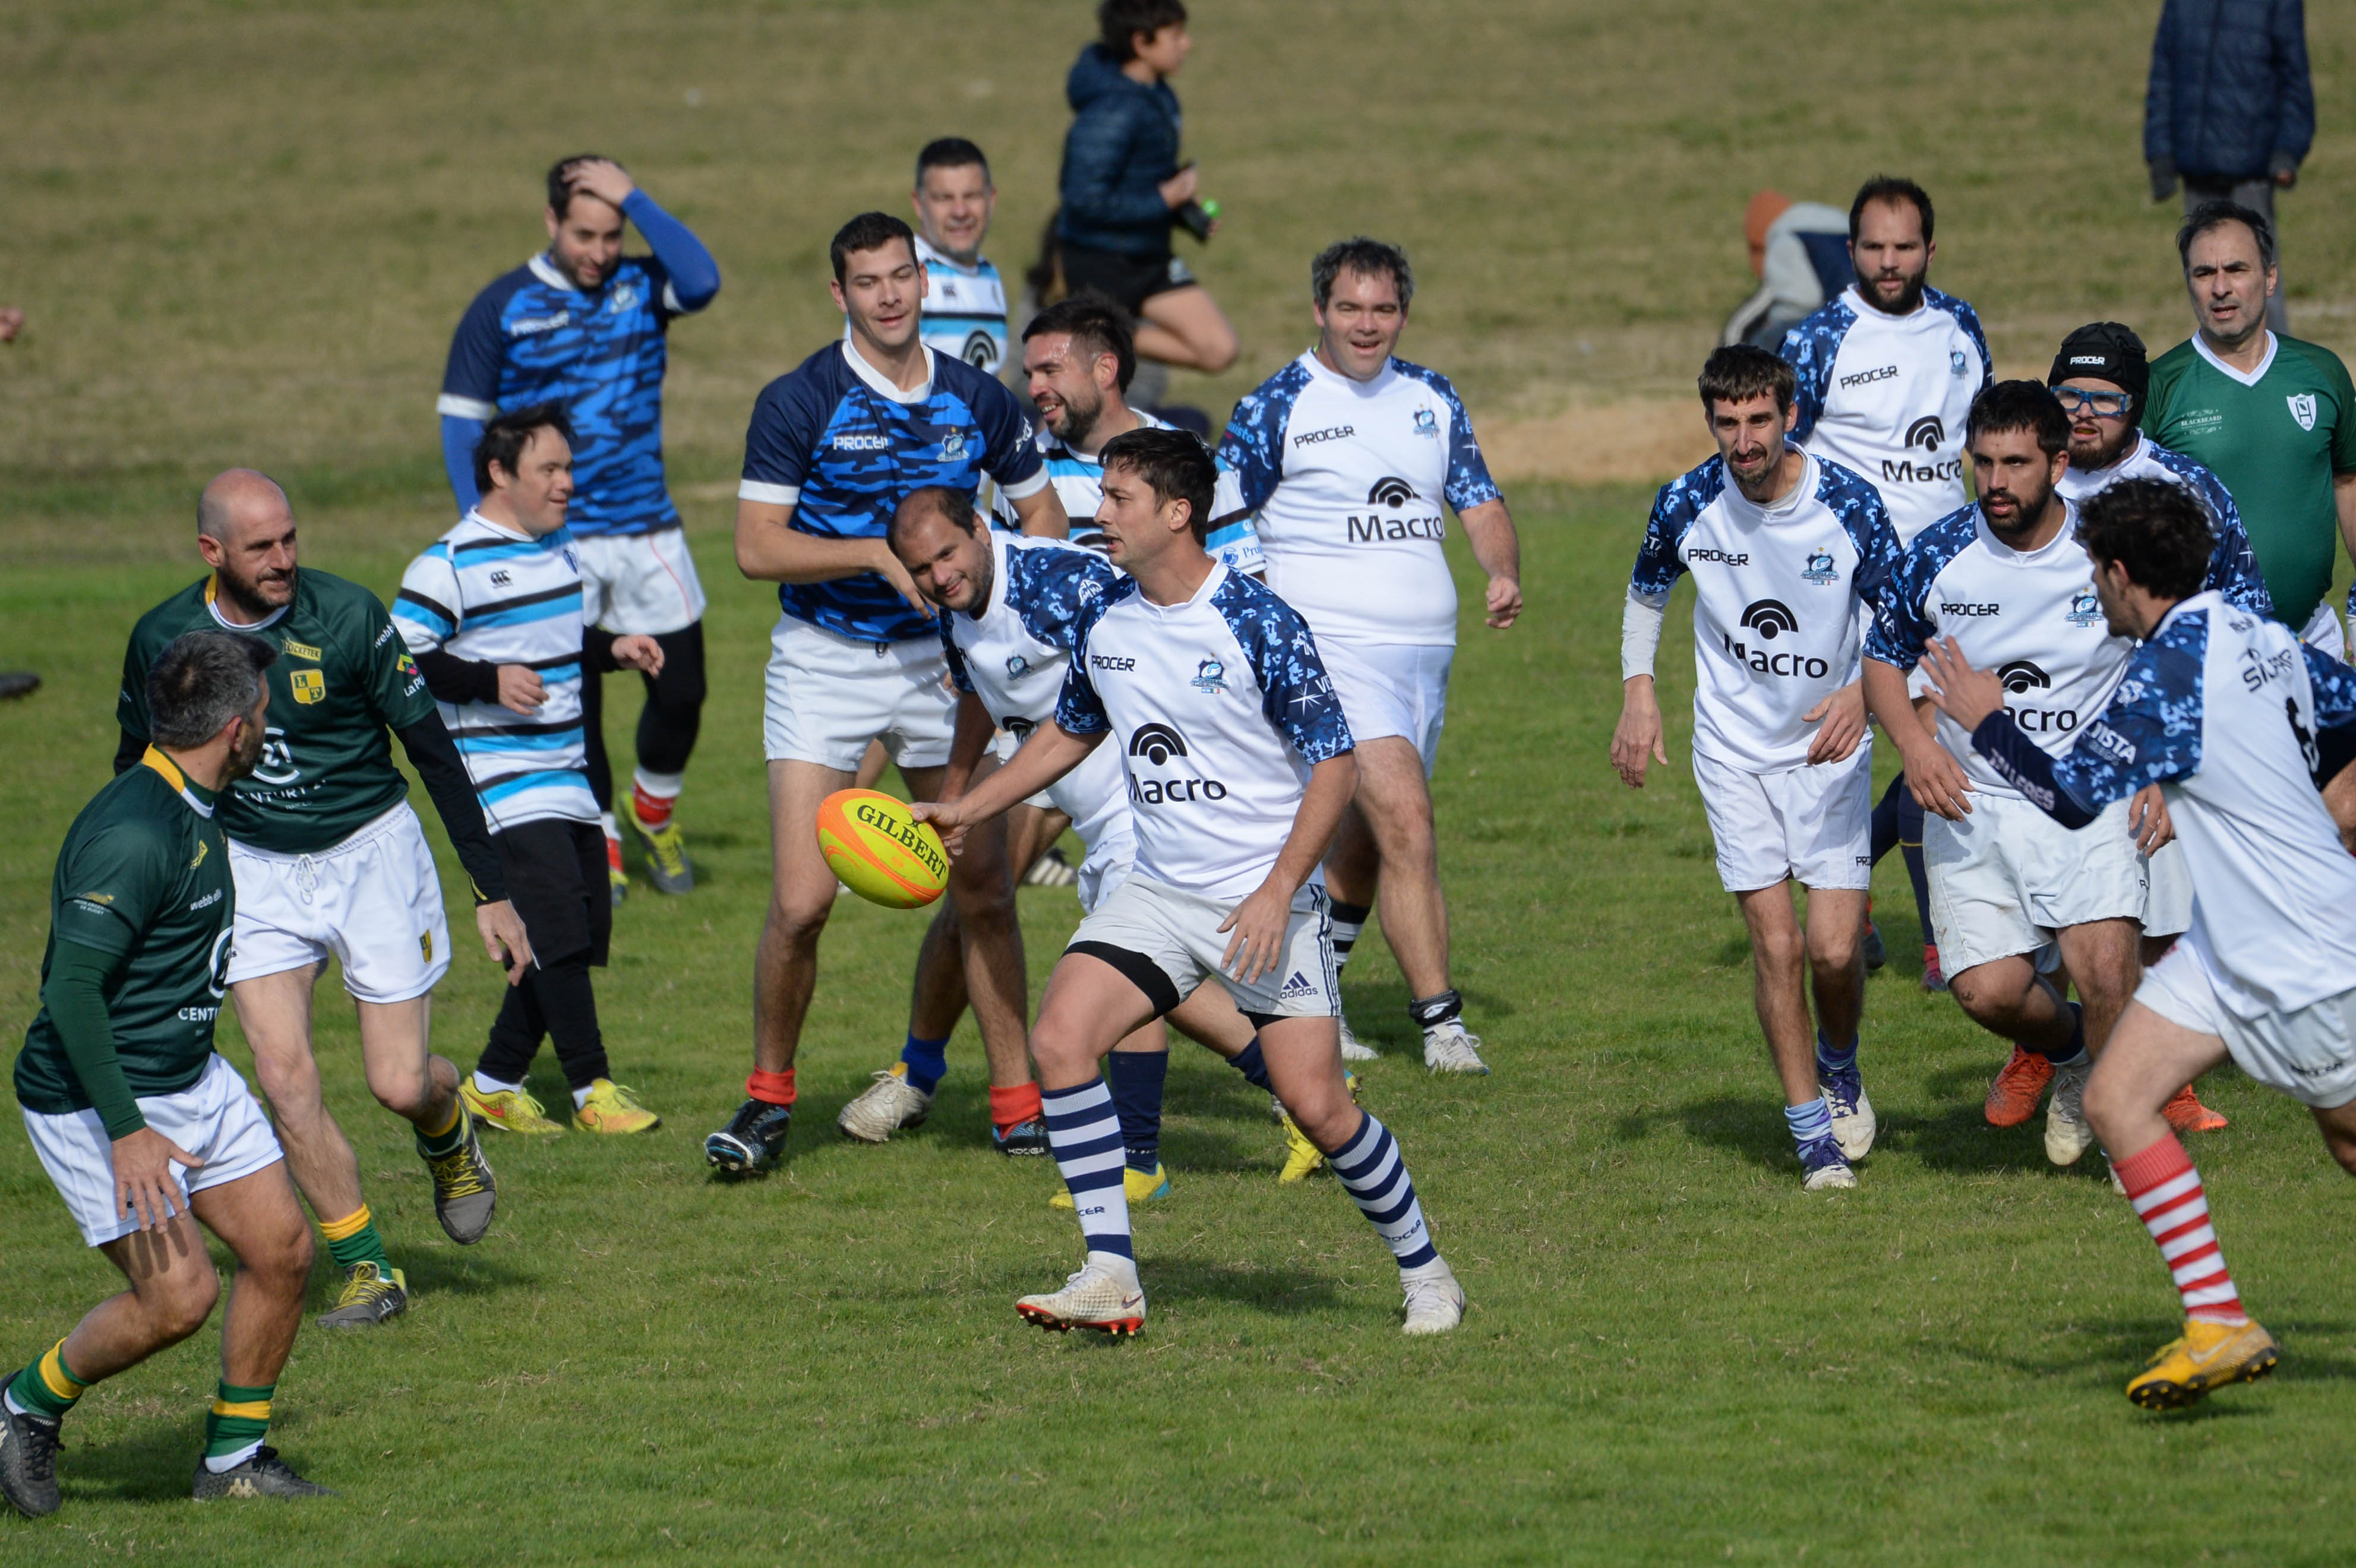 Los Tilos, CIC and Argentine Pampas XV teams in a full match